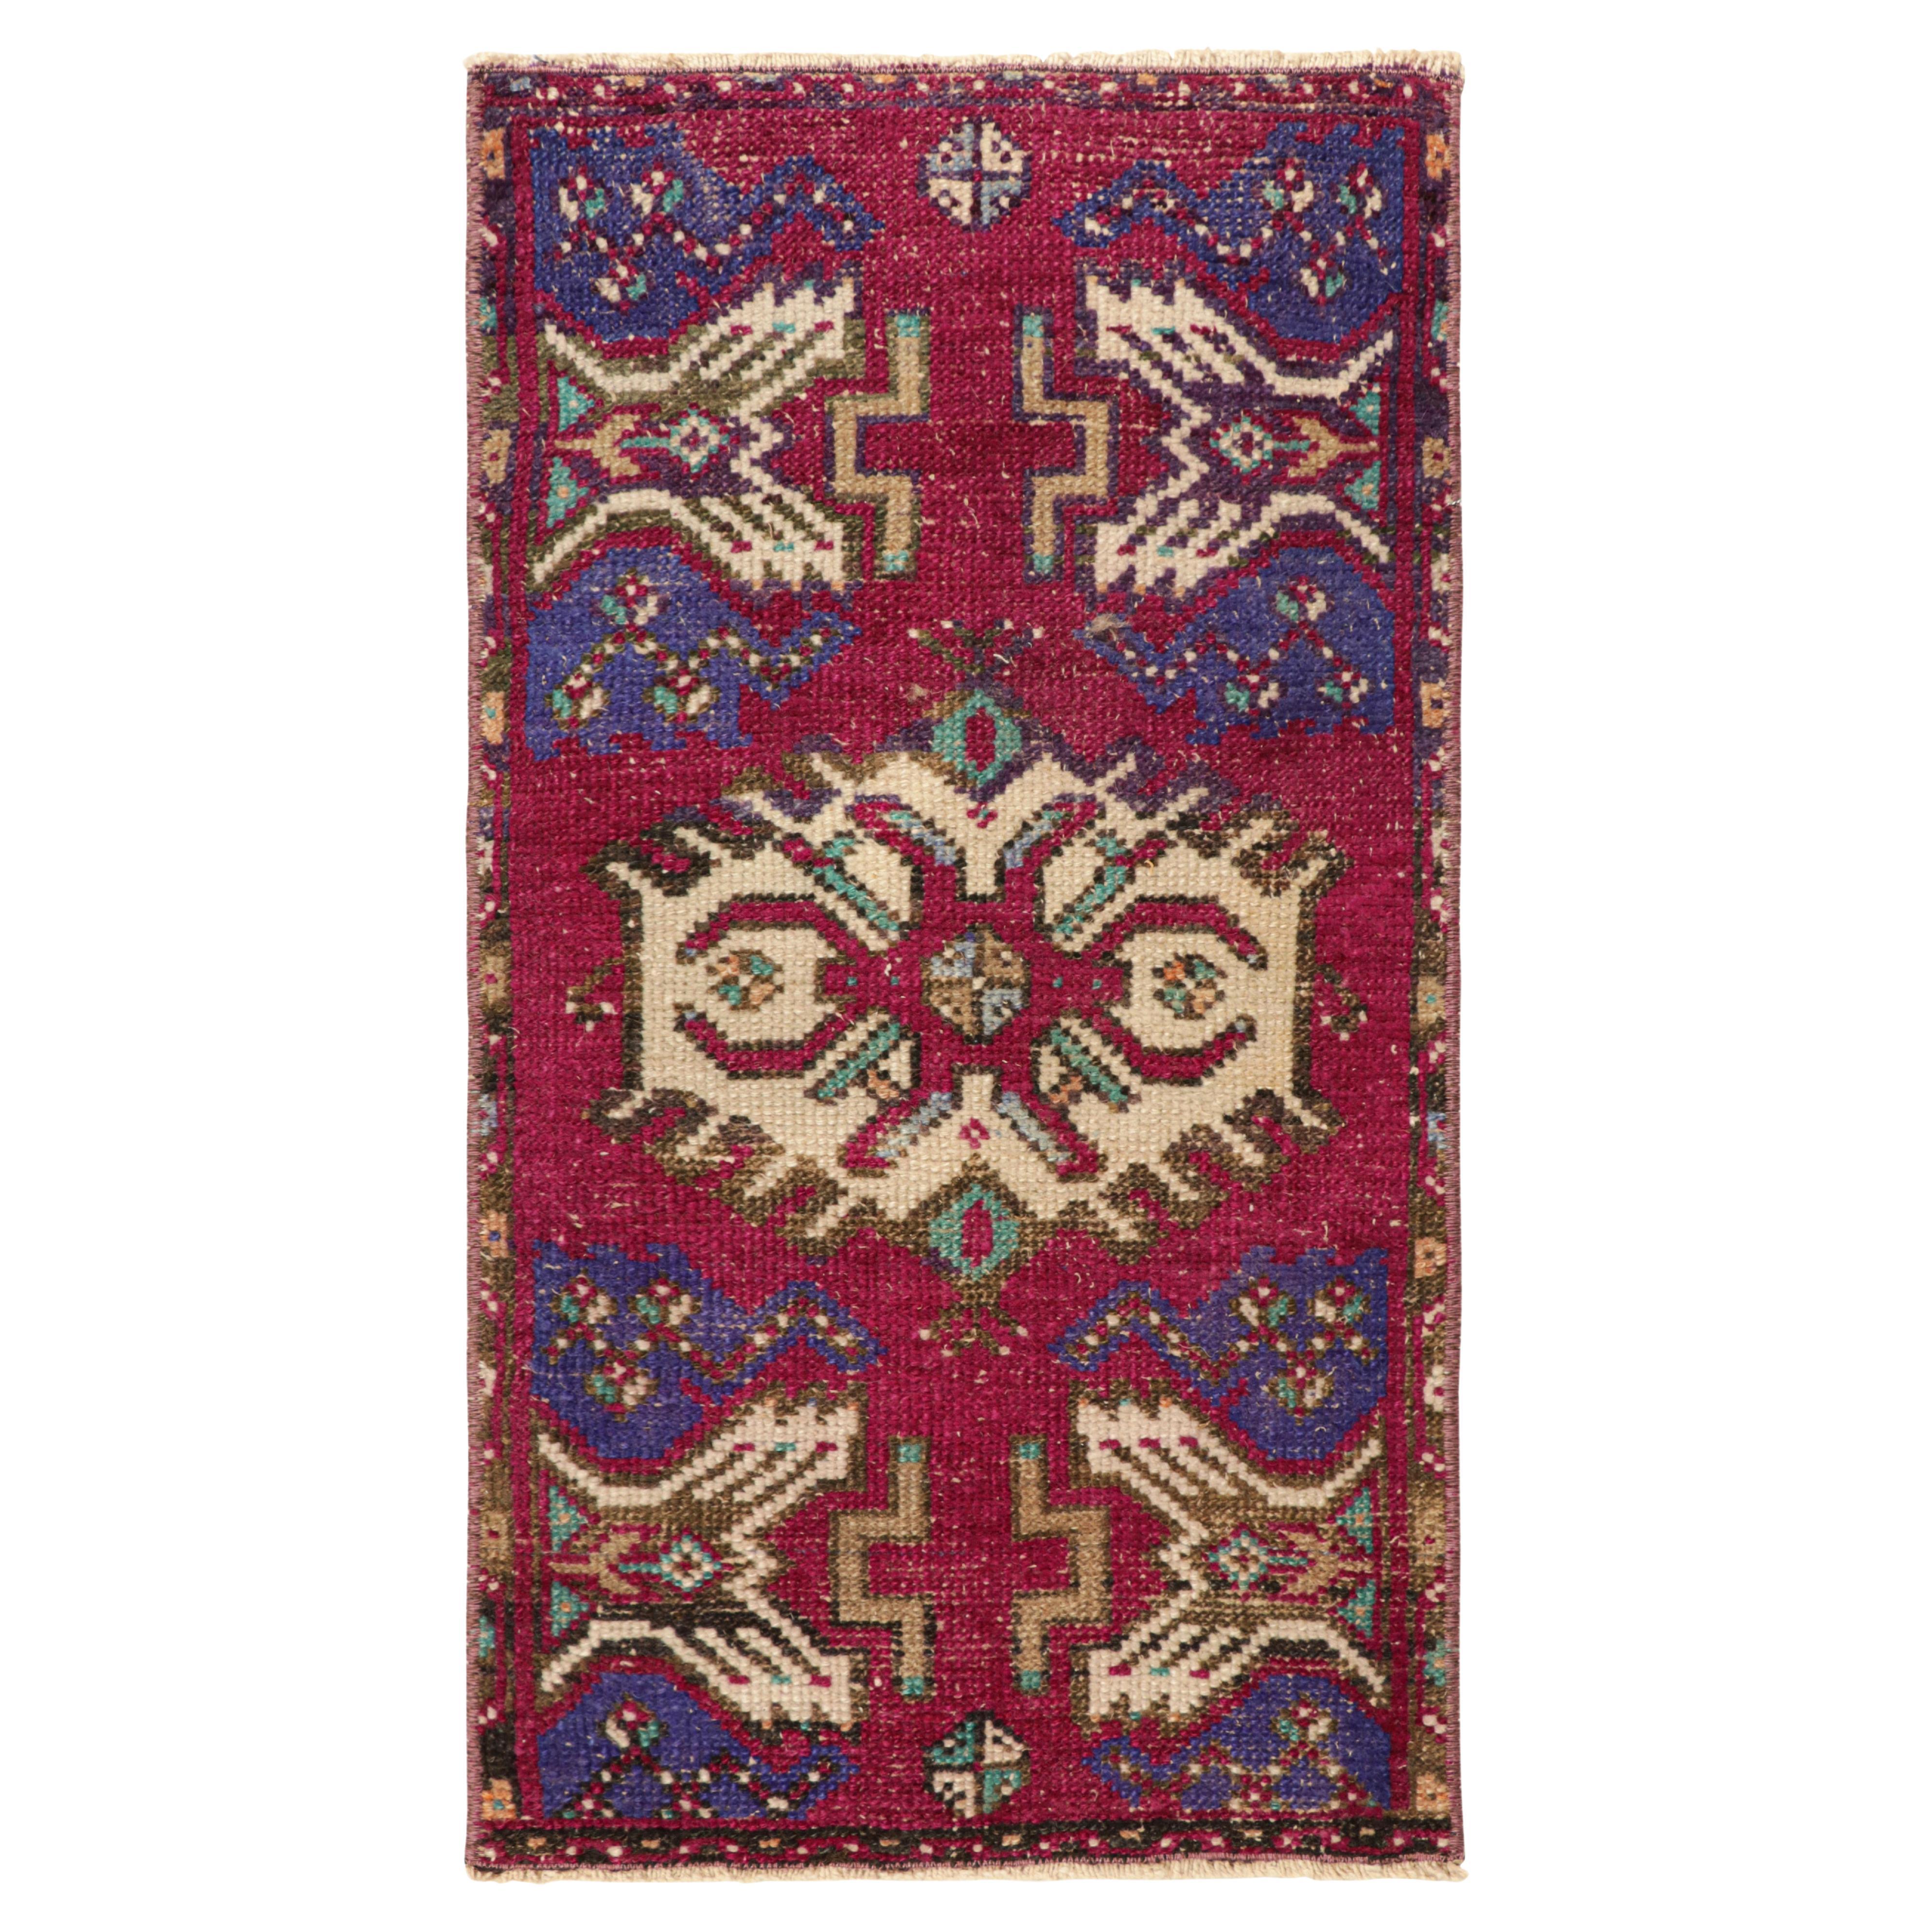 Vintage Oushak Rug in Burgundy with Geometric Medallions, from Rug & Kilim